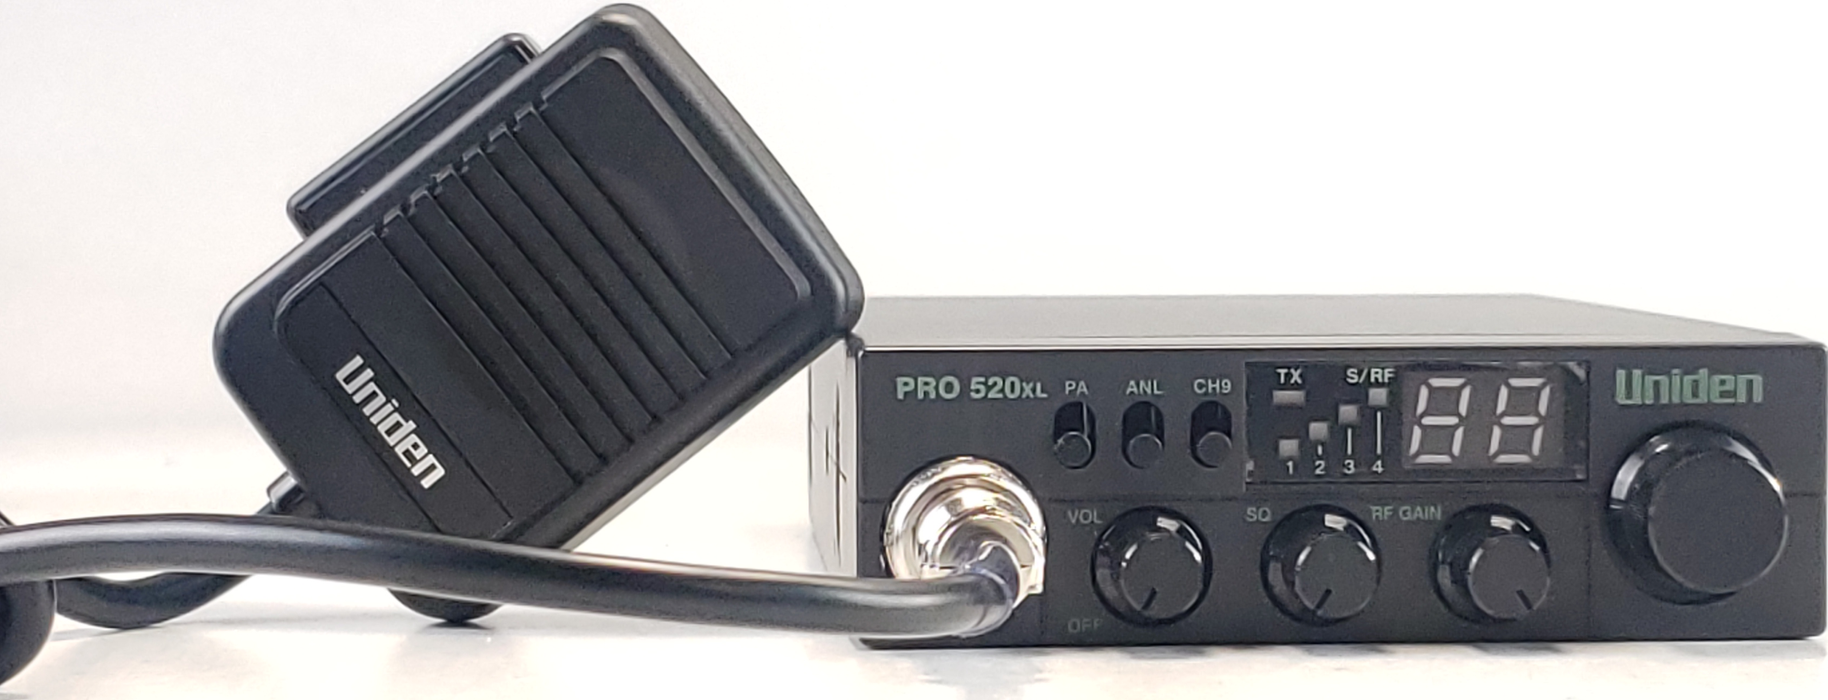 PRO520XL Compact Mobile CB Radio with PA